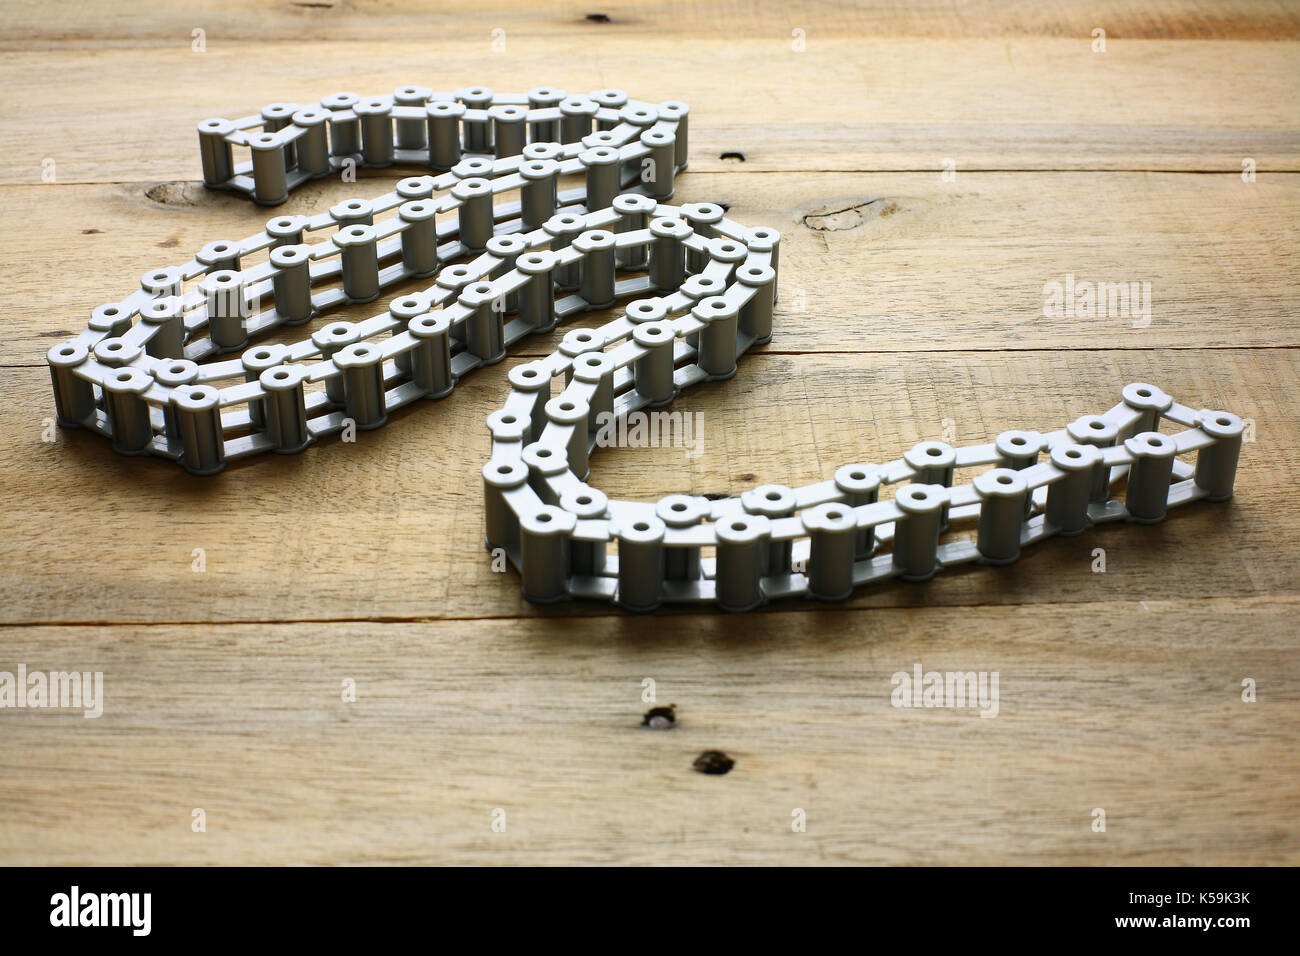 Bicycle Chain on Wooden Chain Stock Photo